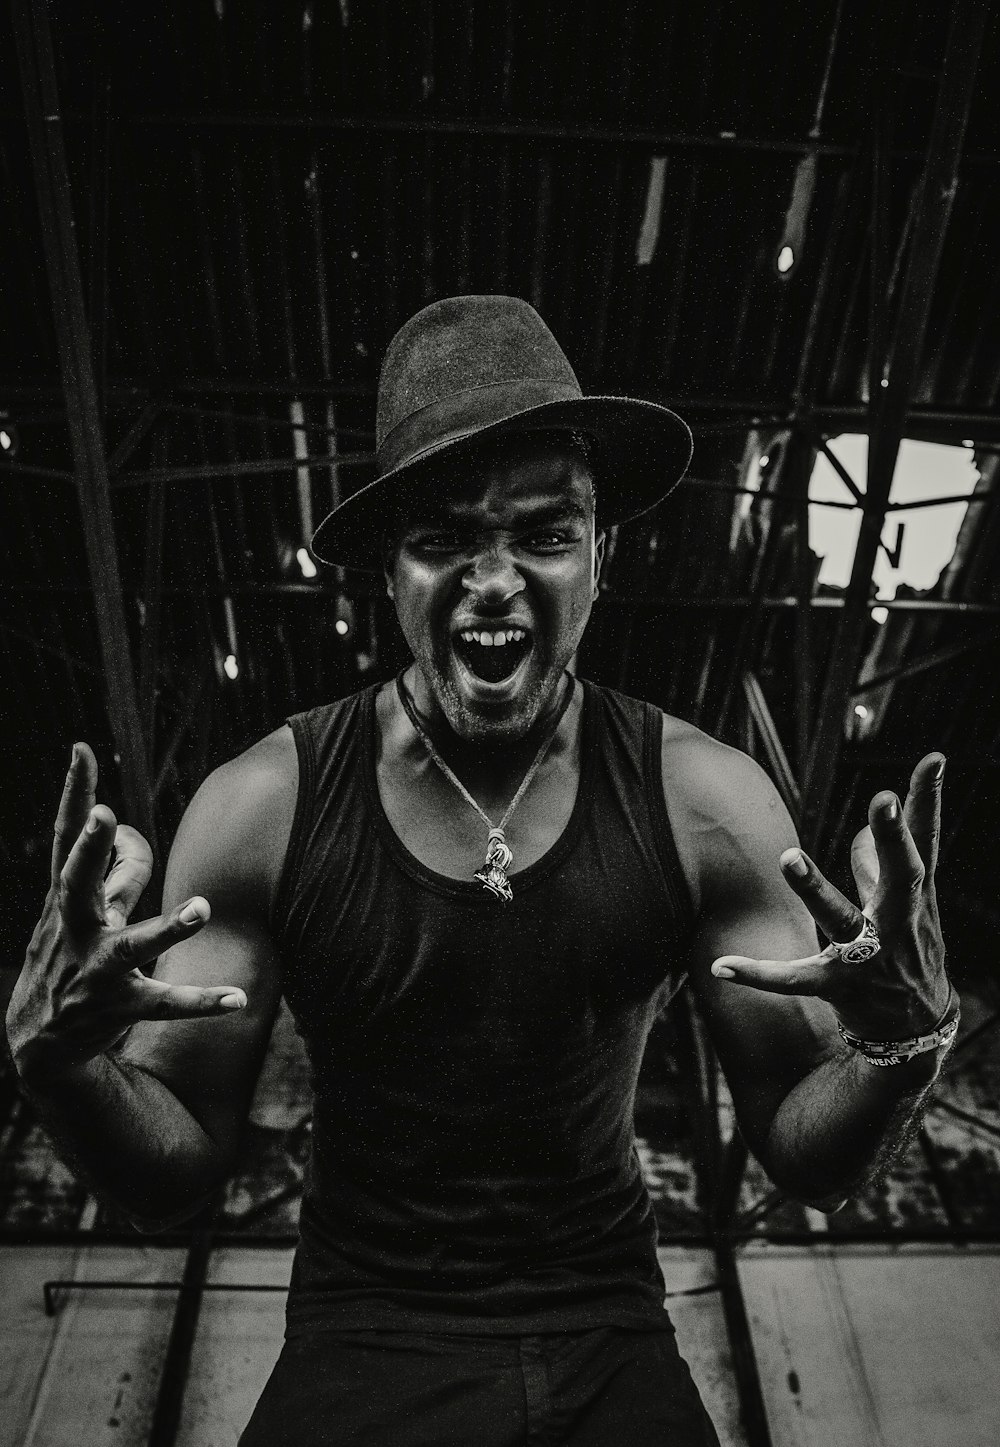 grayscale photography of shouting man in tank top